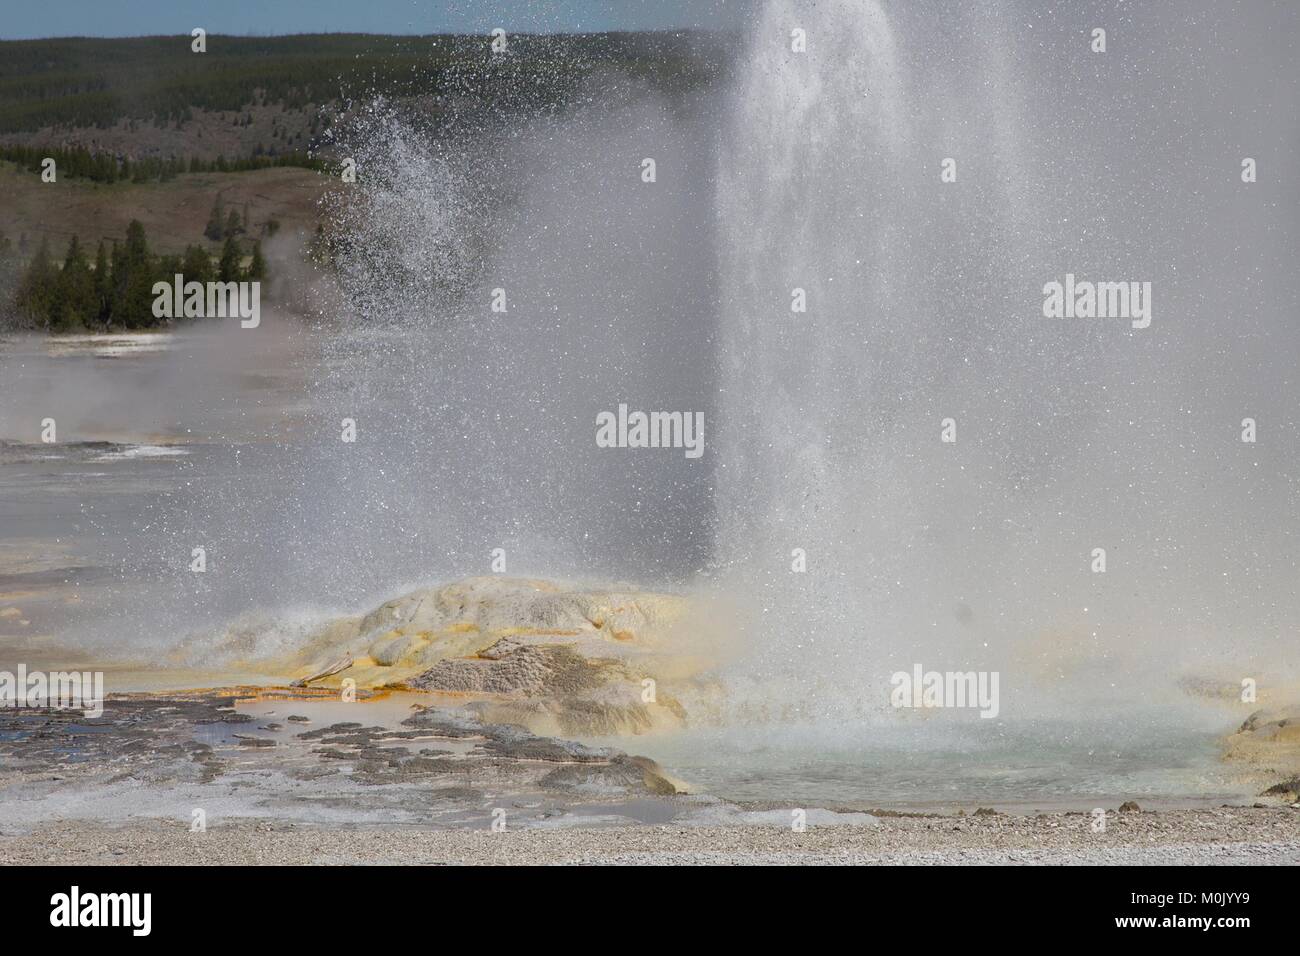 The Clepsydra Geyser erupts in the Lower Geyser Basin at the Yellowstone National Park June 20, 2017 in Wyoming. Stock Photo